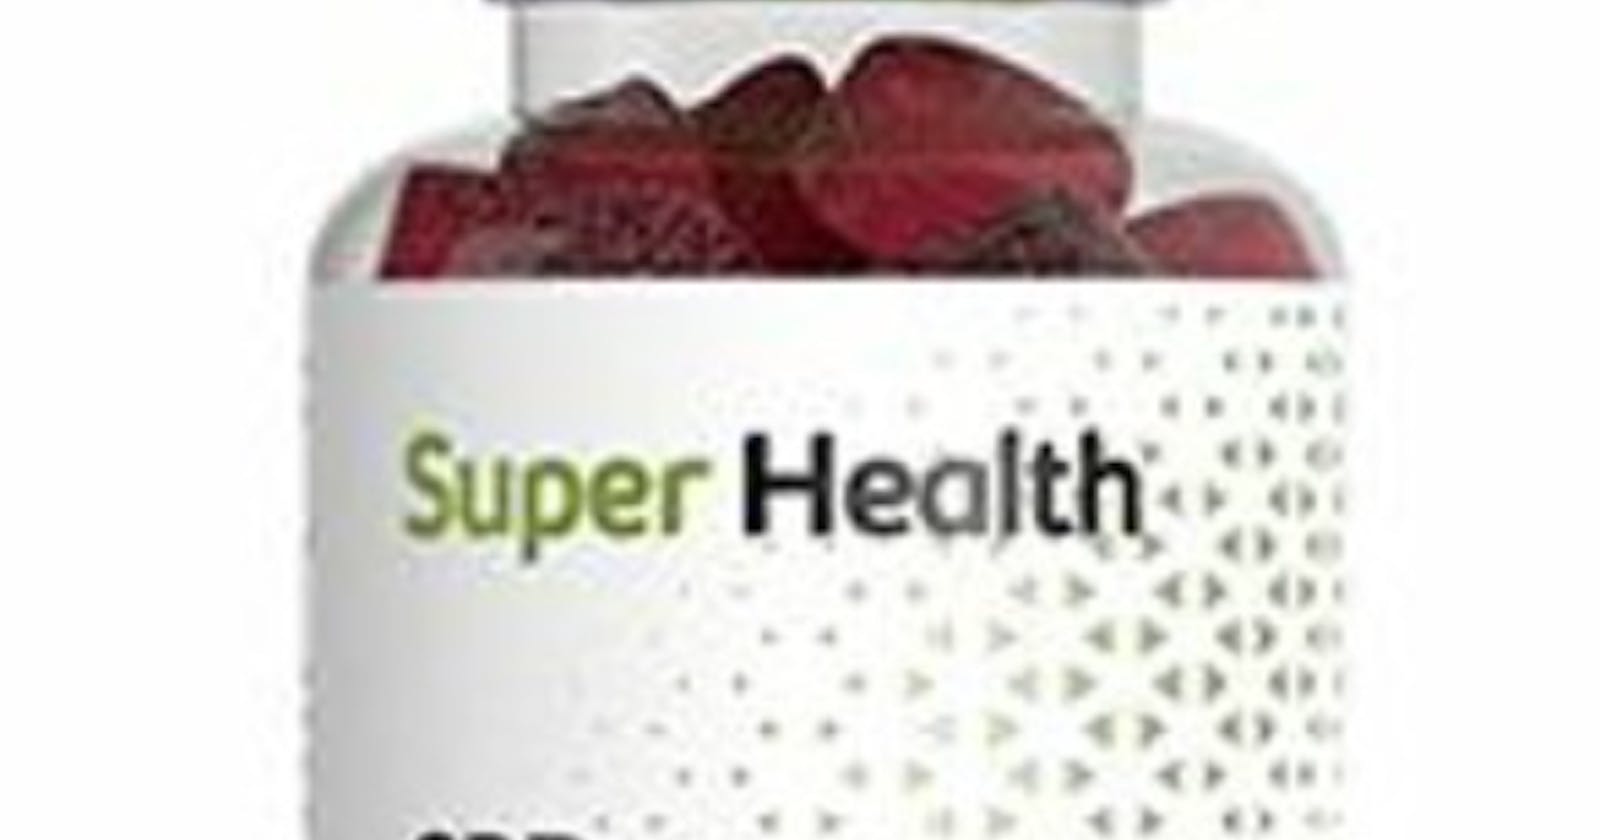 Super Health CBD Gummies Reviews - Real Ingredients or Fake Customer Results? Scam or Safe?